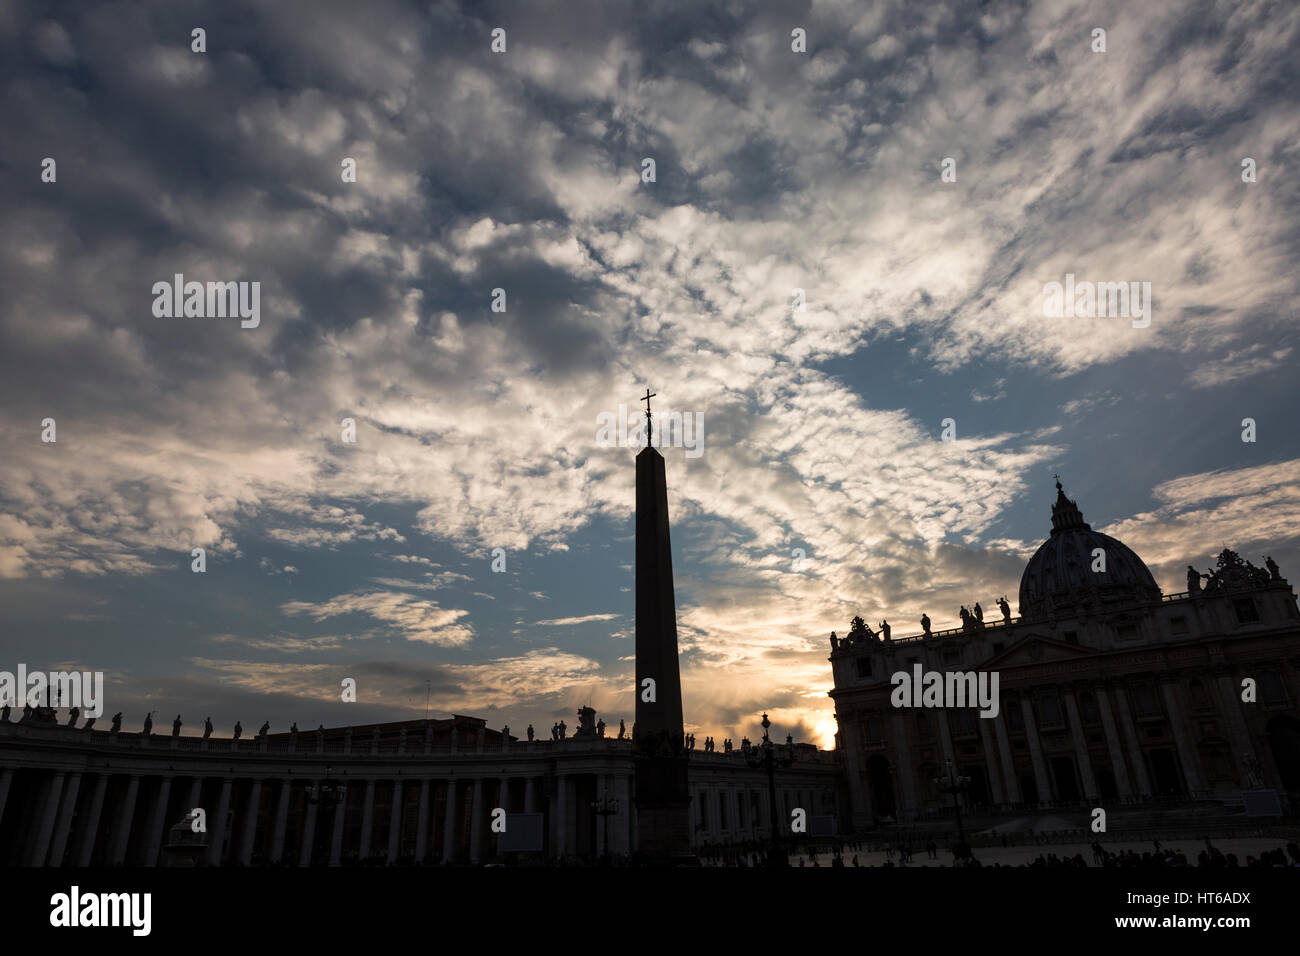 Saint Peter's Square, Vatican City, silhouette against a cloudy sky Stock Photo